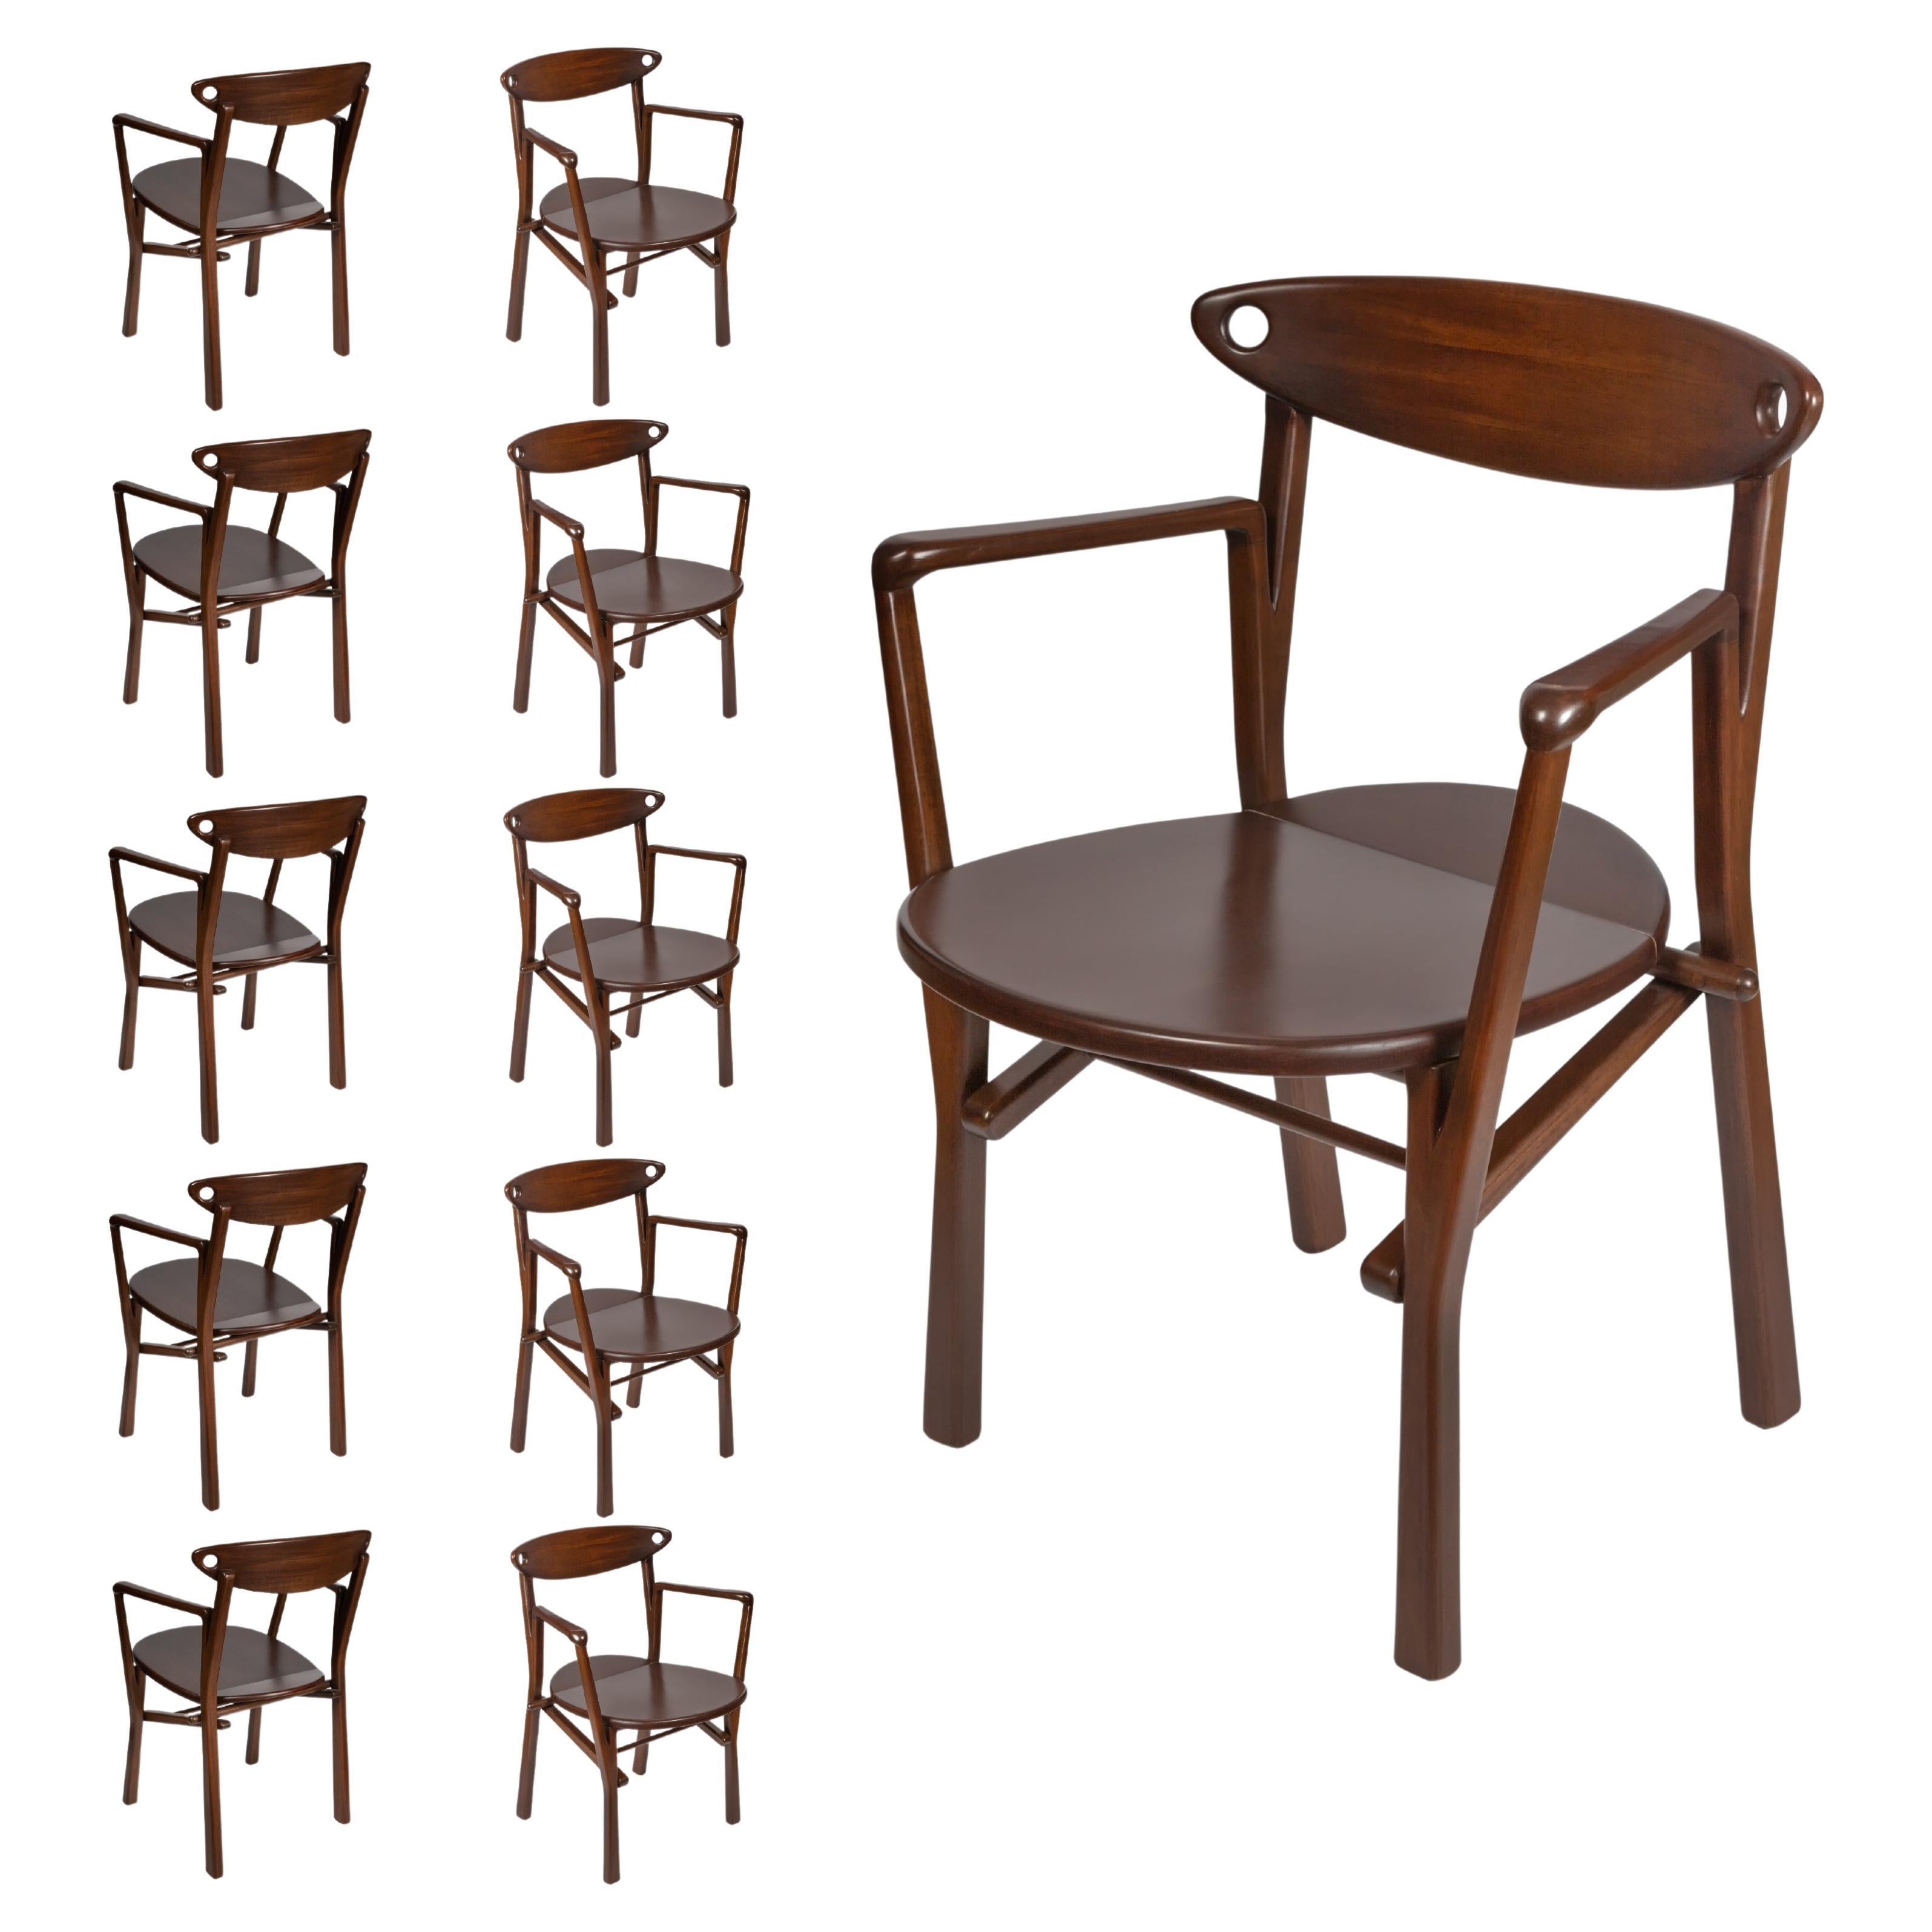 Set of 10 Dinner Chairs Laje in Dark Brown Finish Wood  For Sale